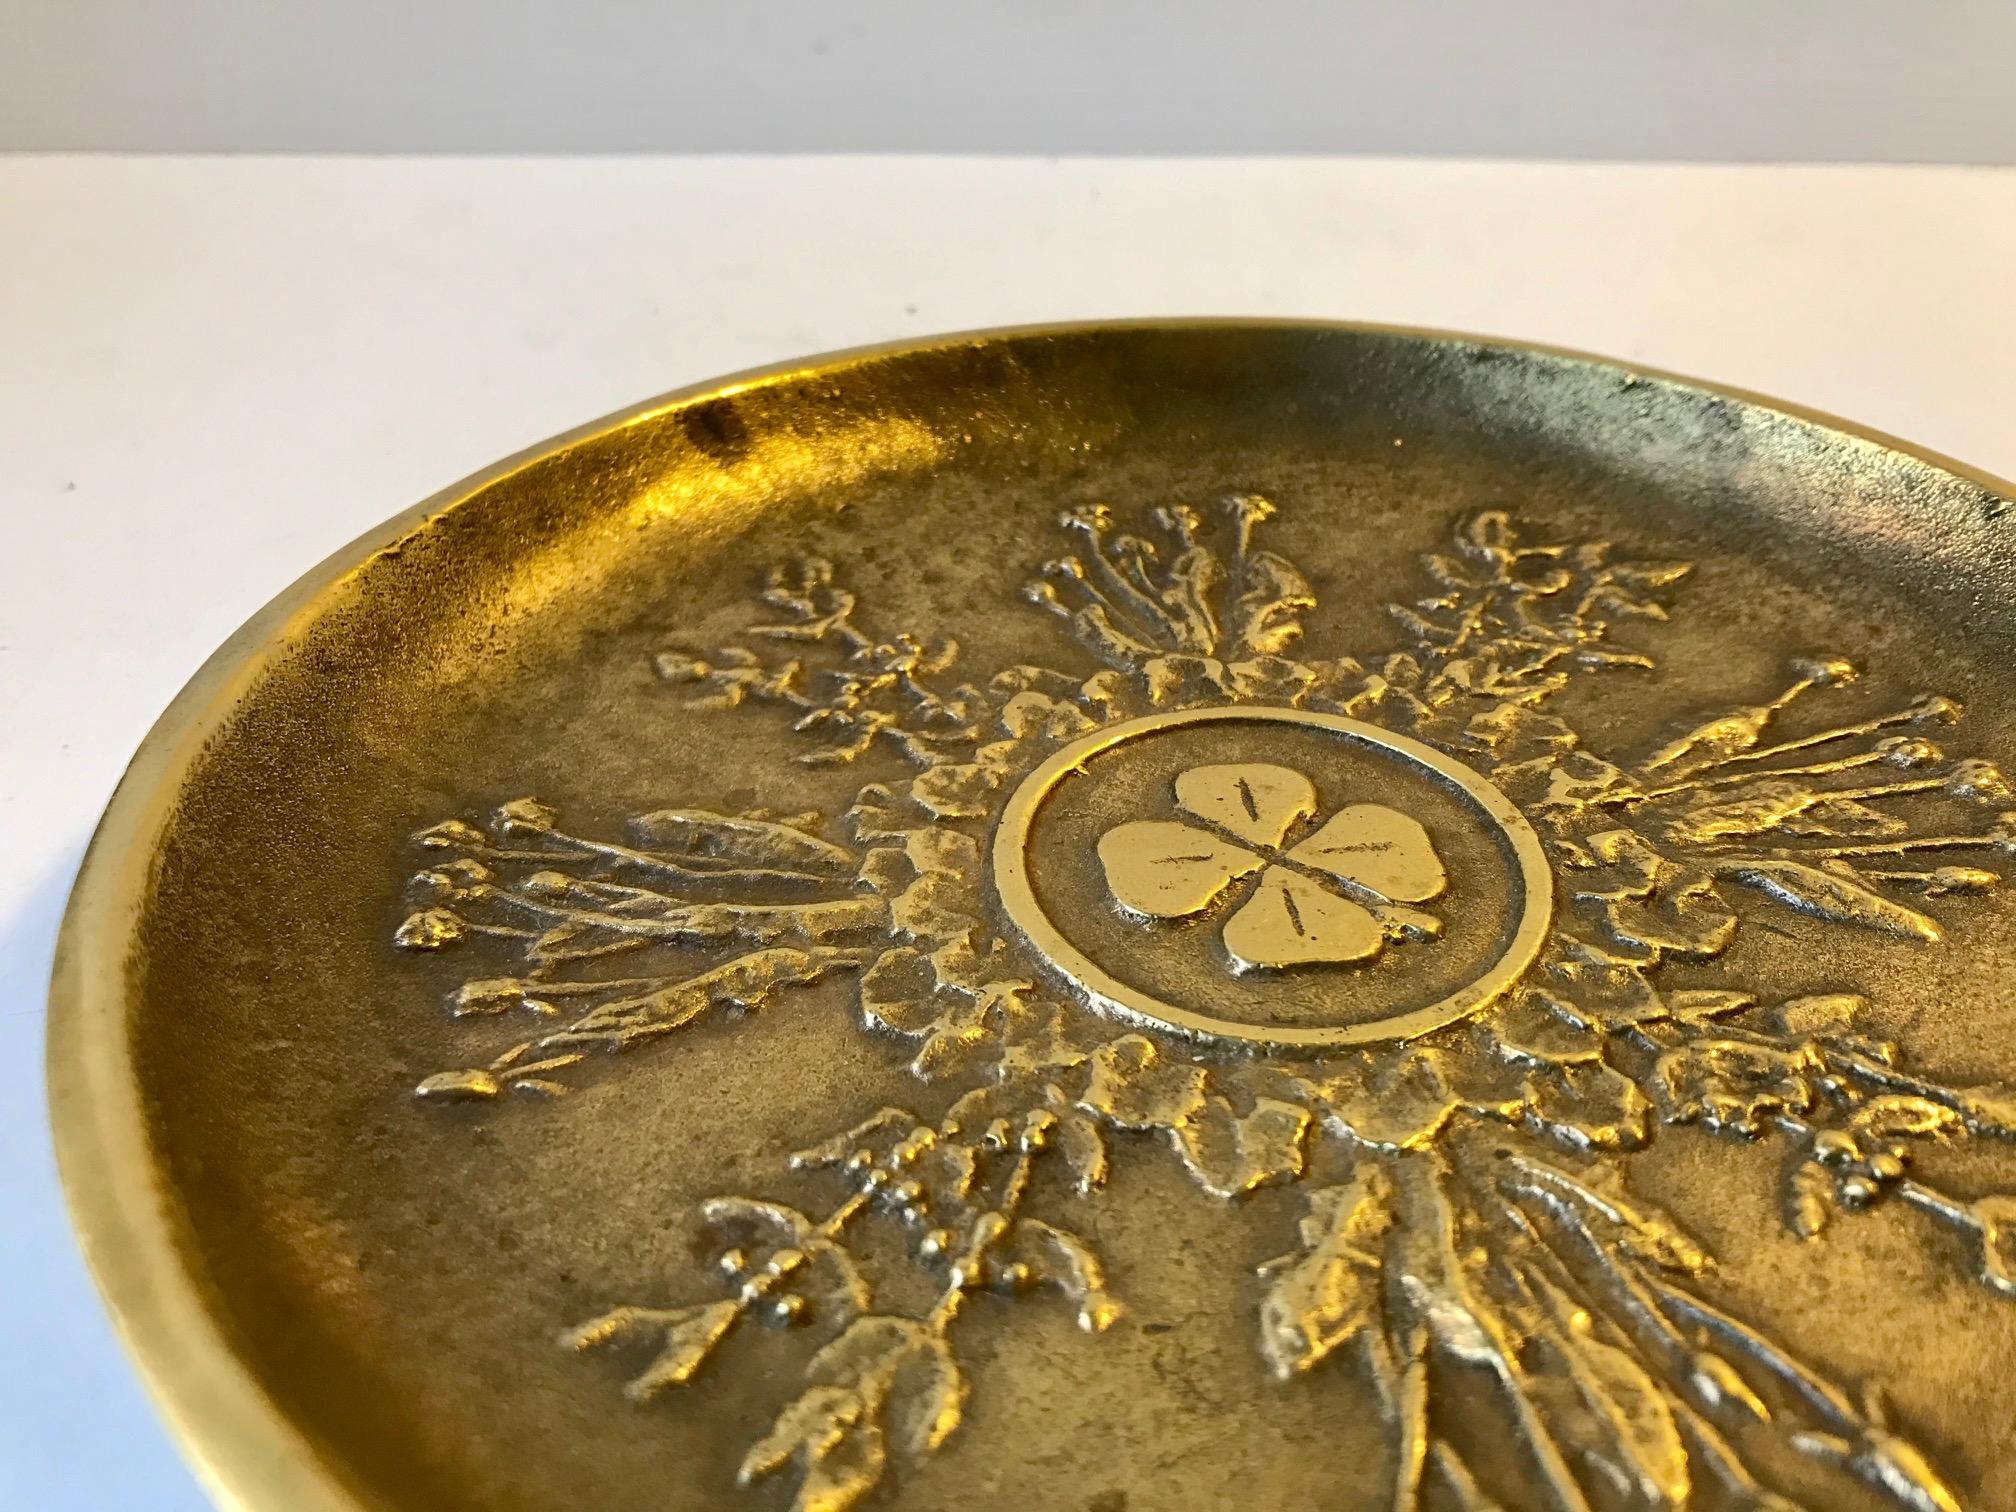 Art Deco bronze bowl or small charger with four clover motif surrounded by floral decorations - all in relief. It is designed by Danish Christian Hansen and manufactured in his metal workshop in Denmark during the 1930s. The same period Just